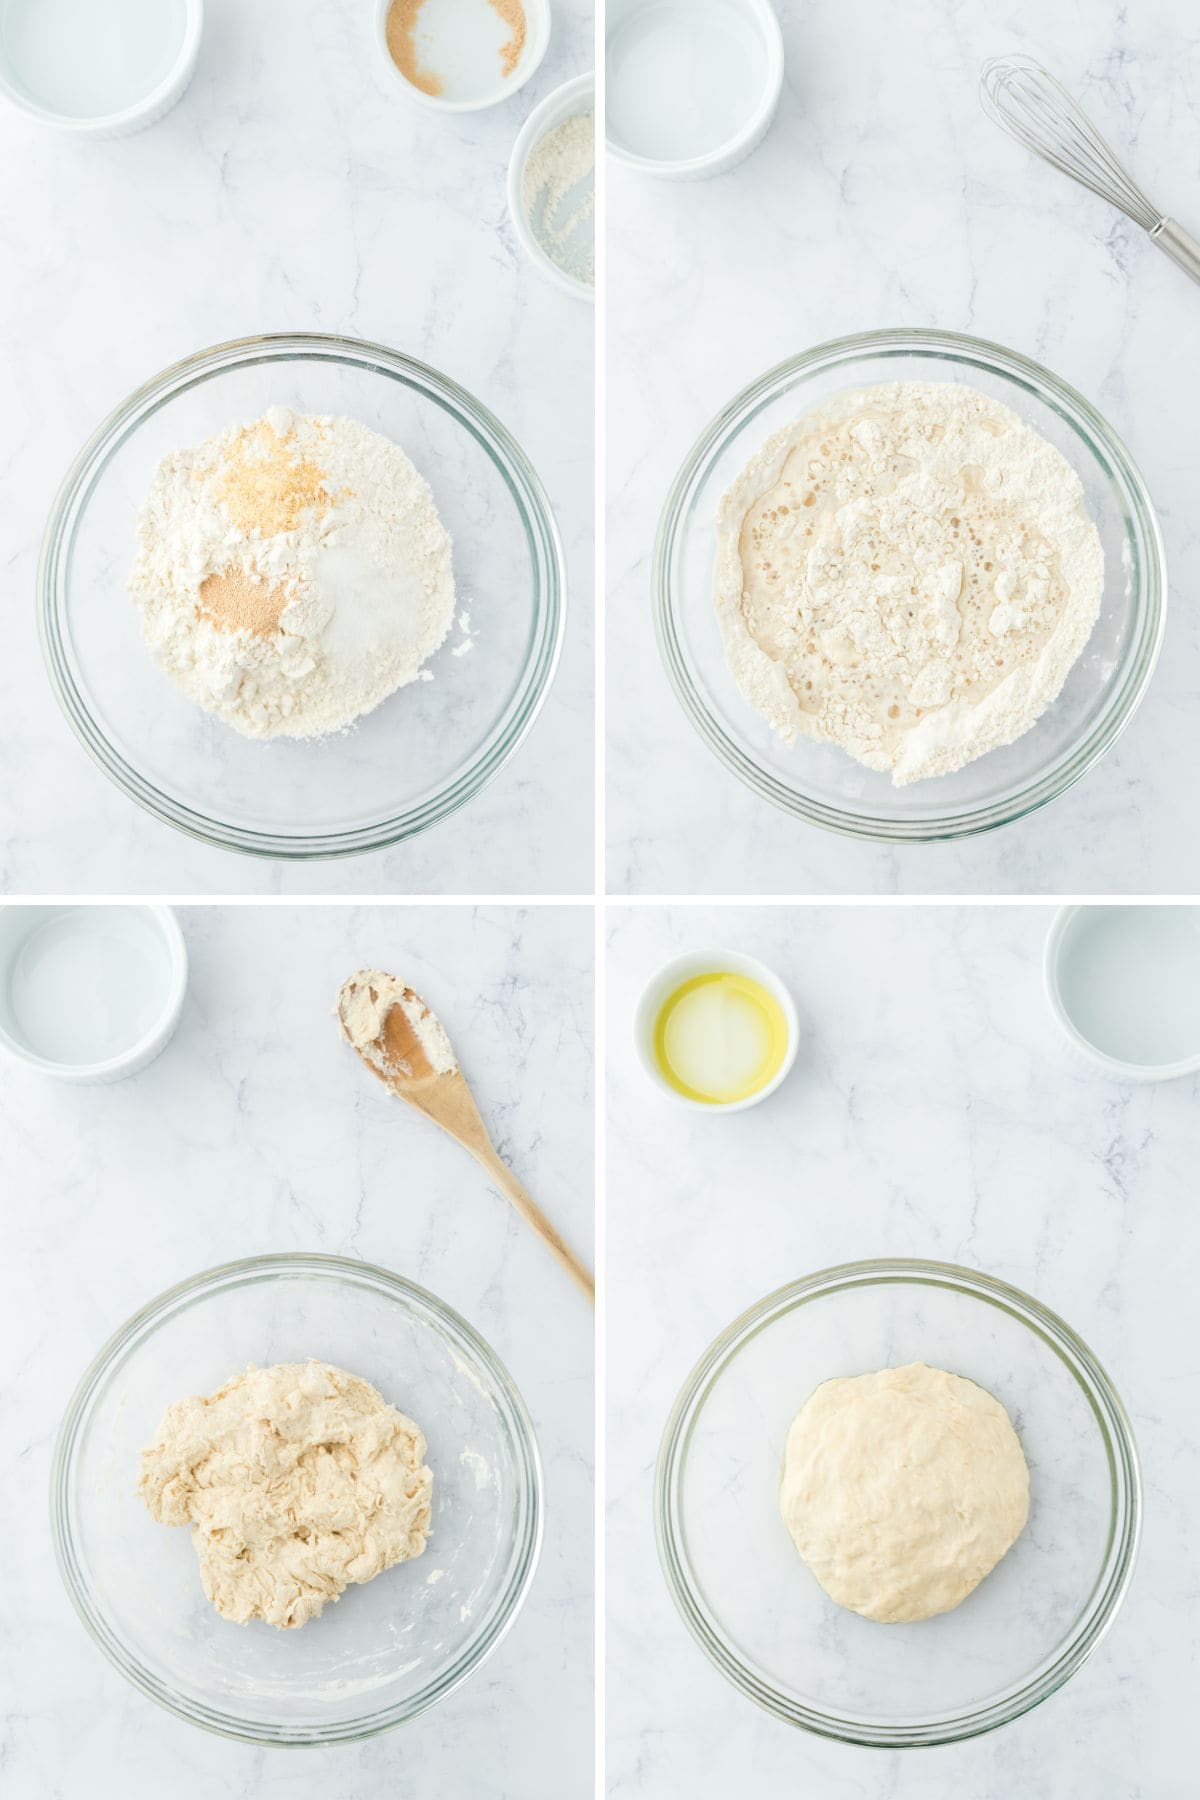 A collage of images showing the mixing of the dough for the cheesy breadsticks.